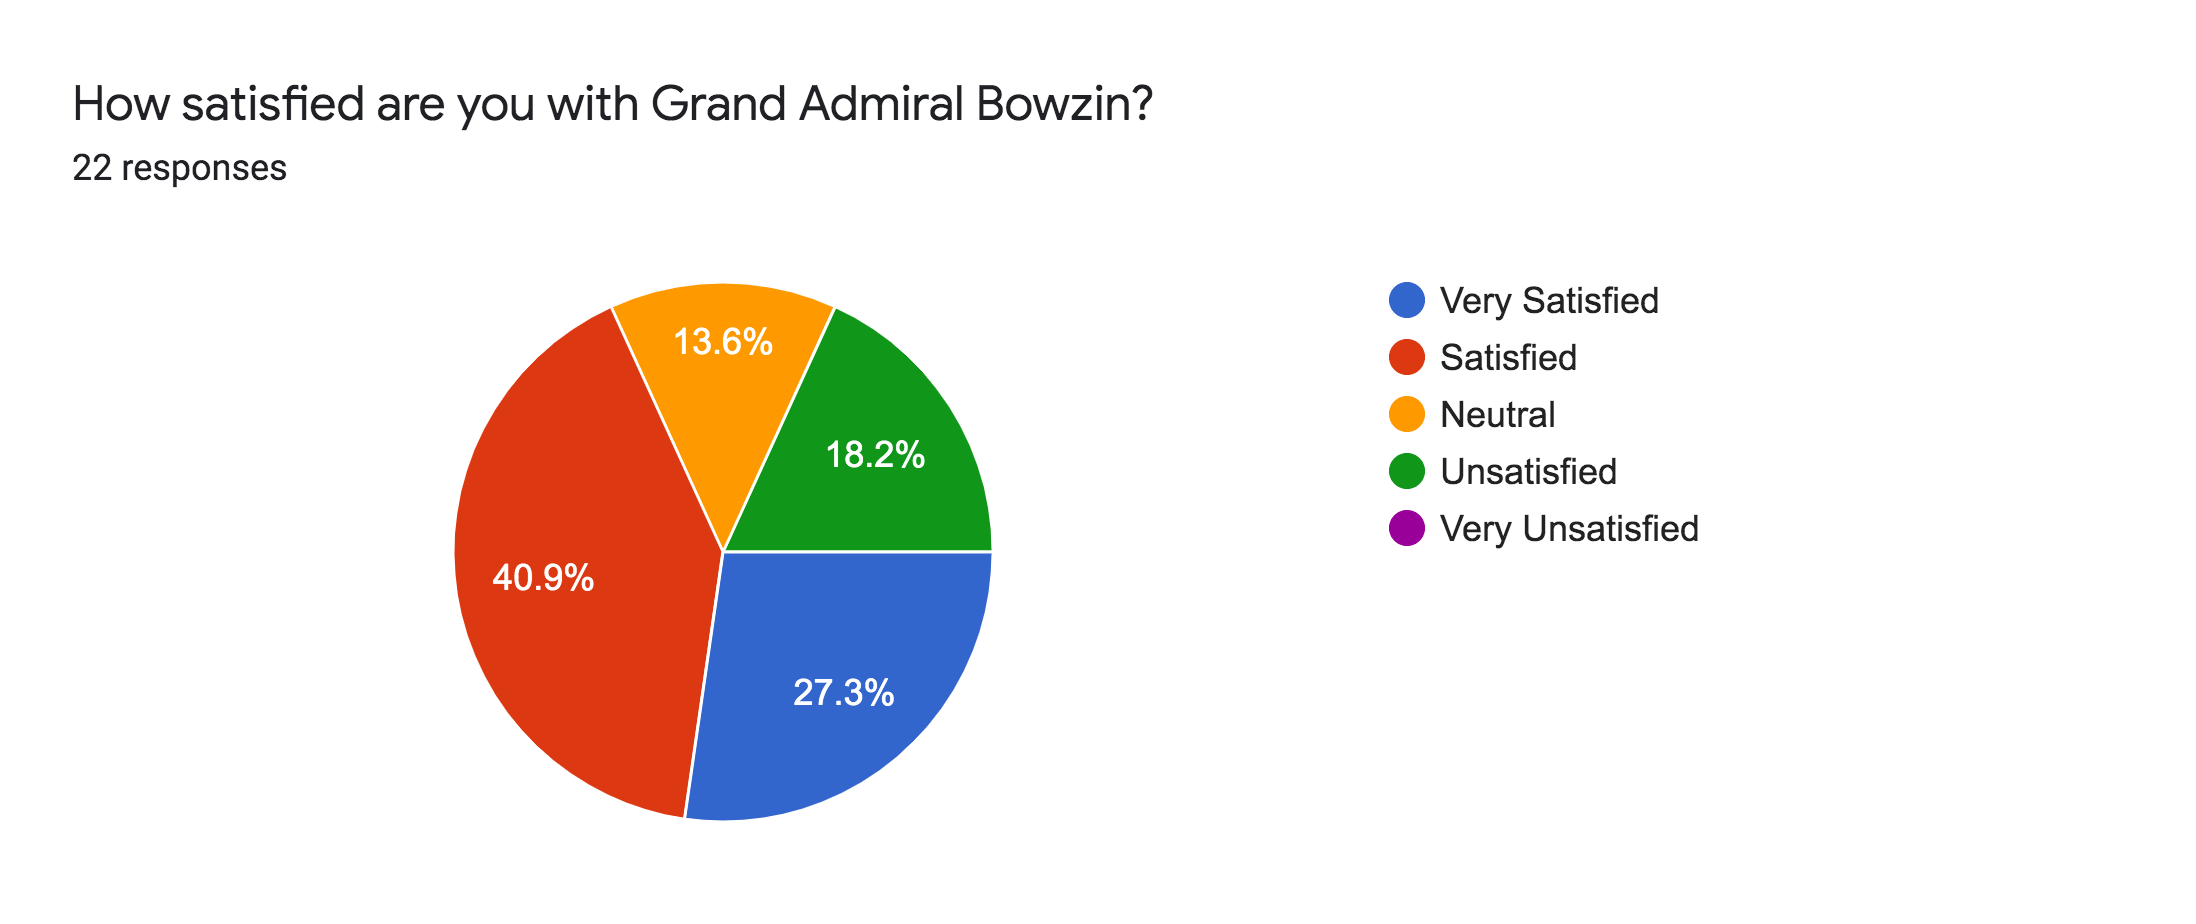 Forms response chart. Question title: How satisfied are you with Grand Admiral Bowzin?. Number of responses: 22 responses.